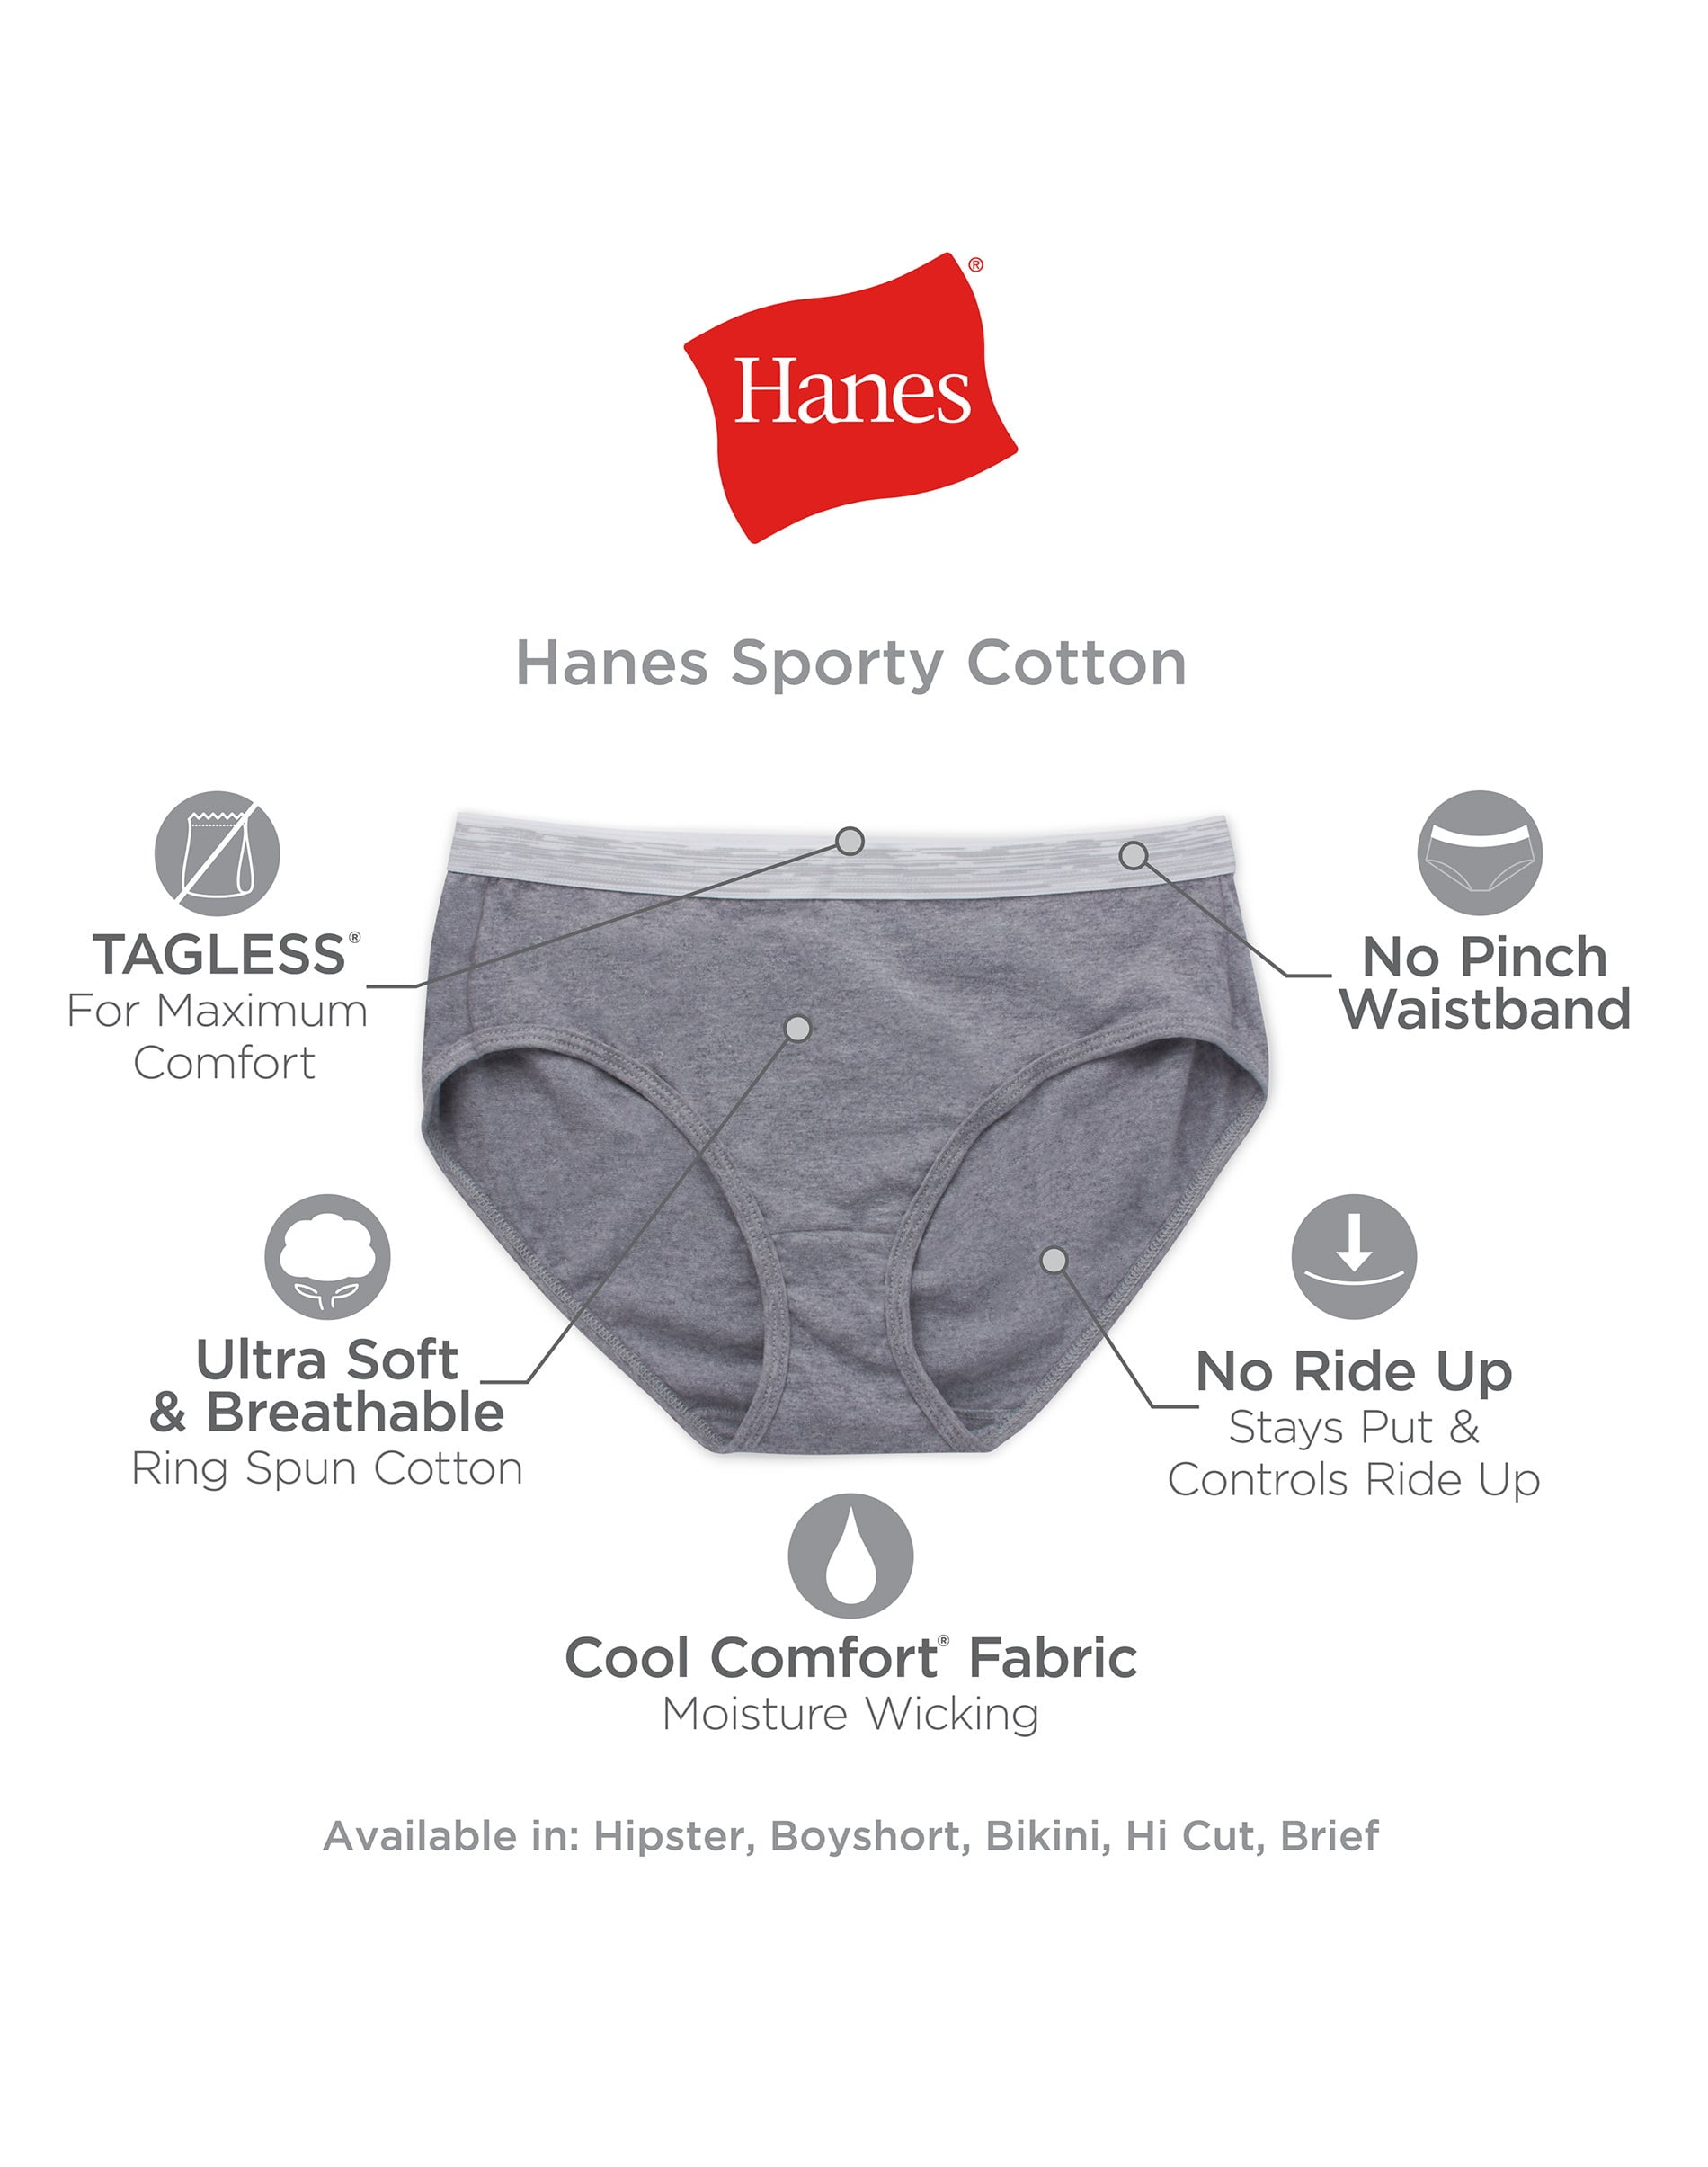 Hanes S840AS Women's Cool Comfort Pure Bliss Cotton Brief Panties 8-Pack